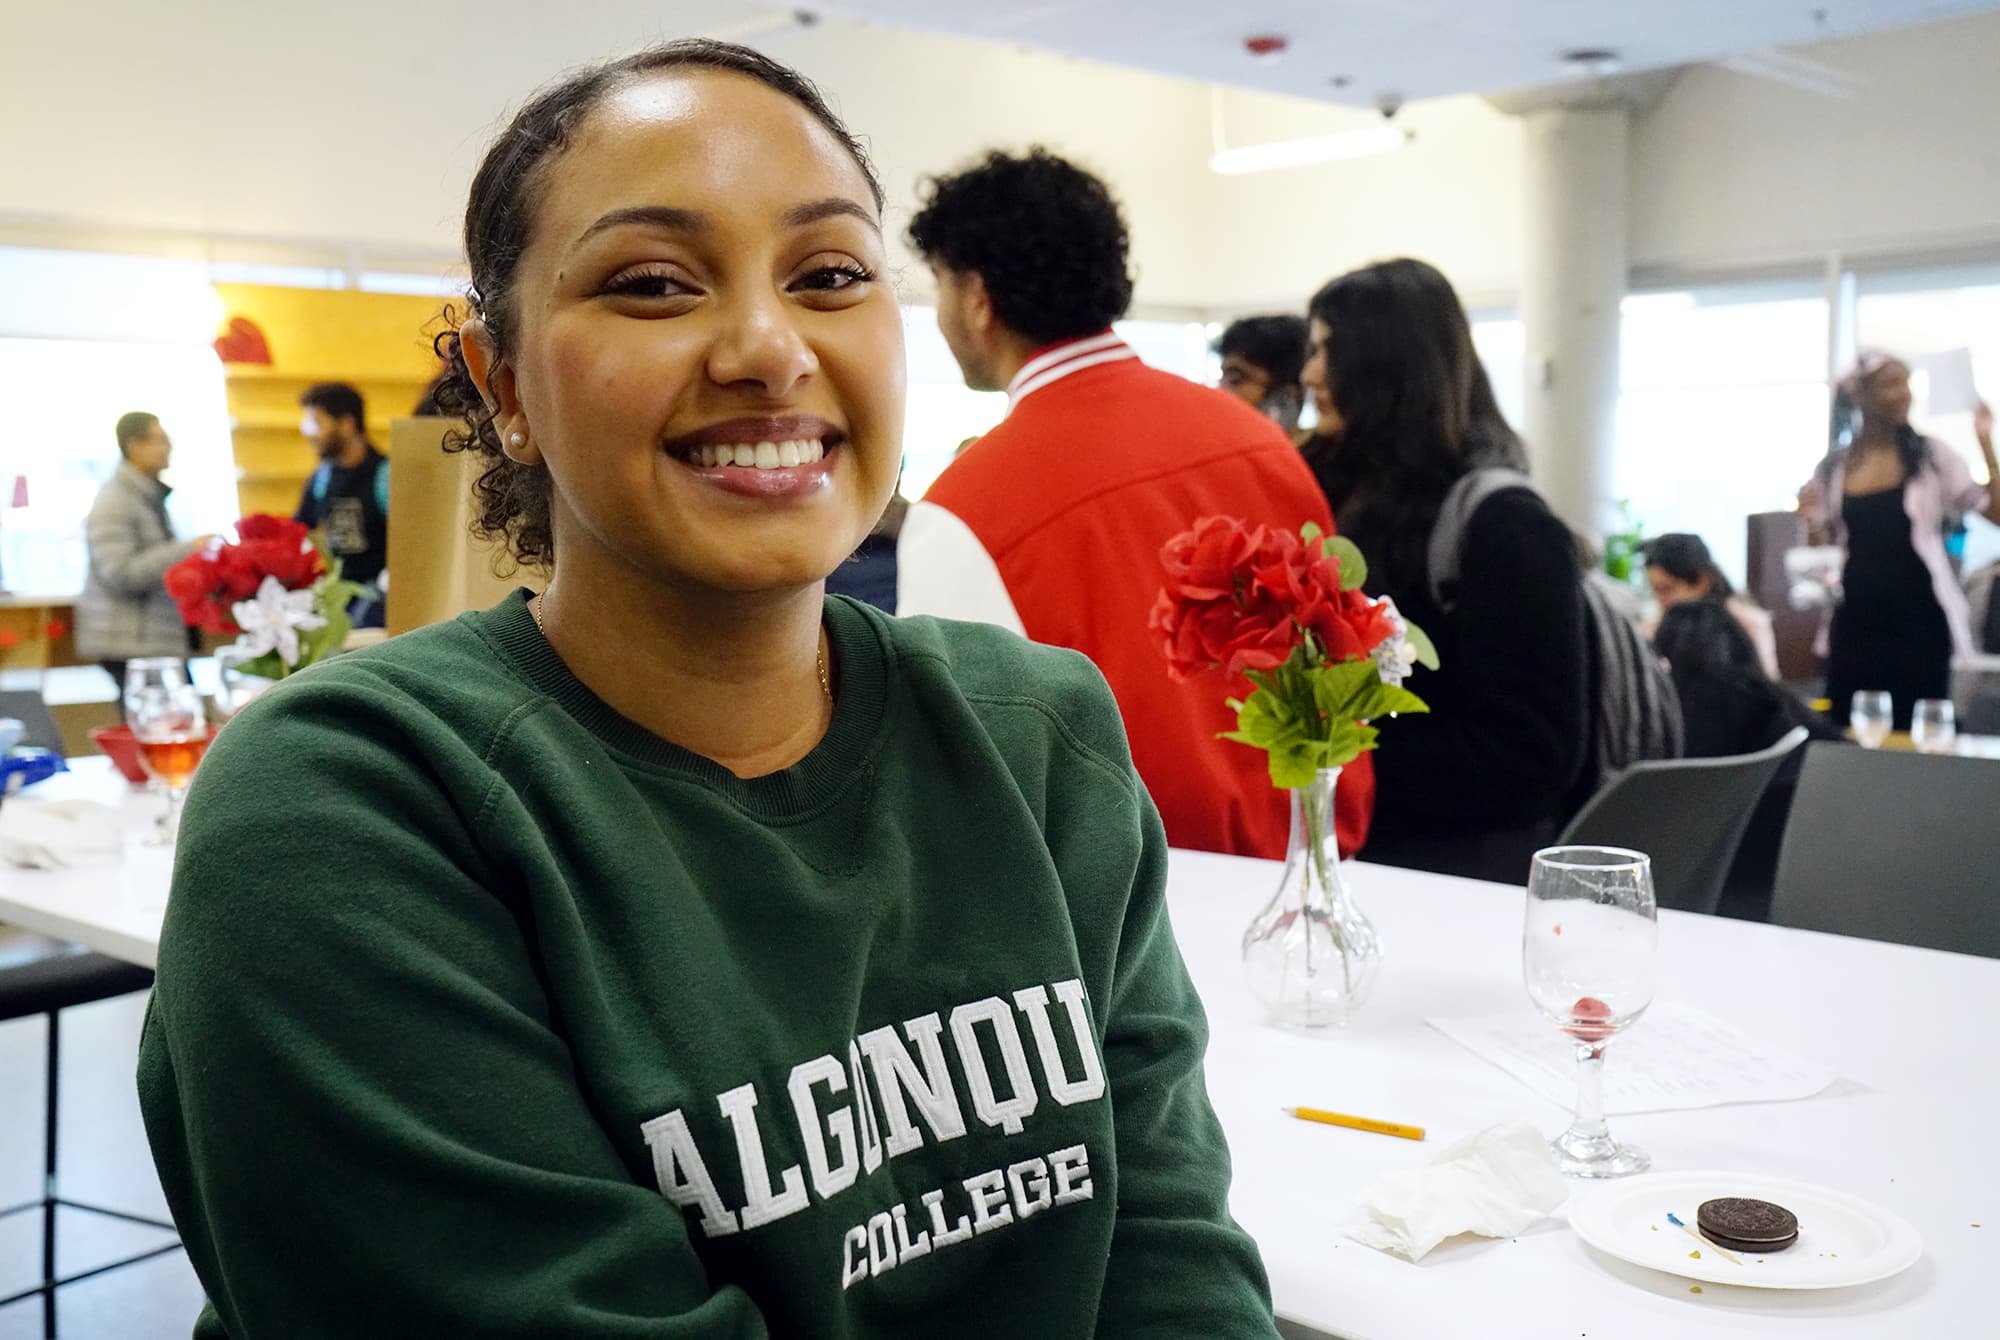 Delina Hailu, a student majoring in business administration at Algonquin College, enjoys snacks, drinks, and chatting with a new friend at the AC Hub.